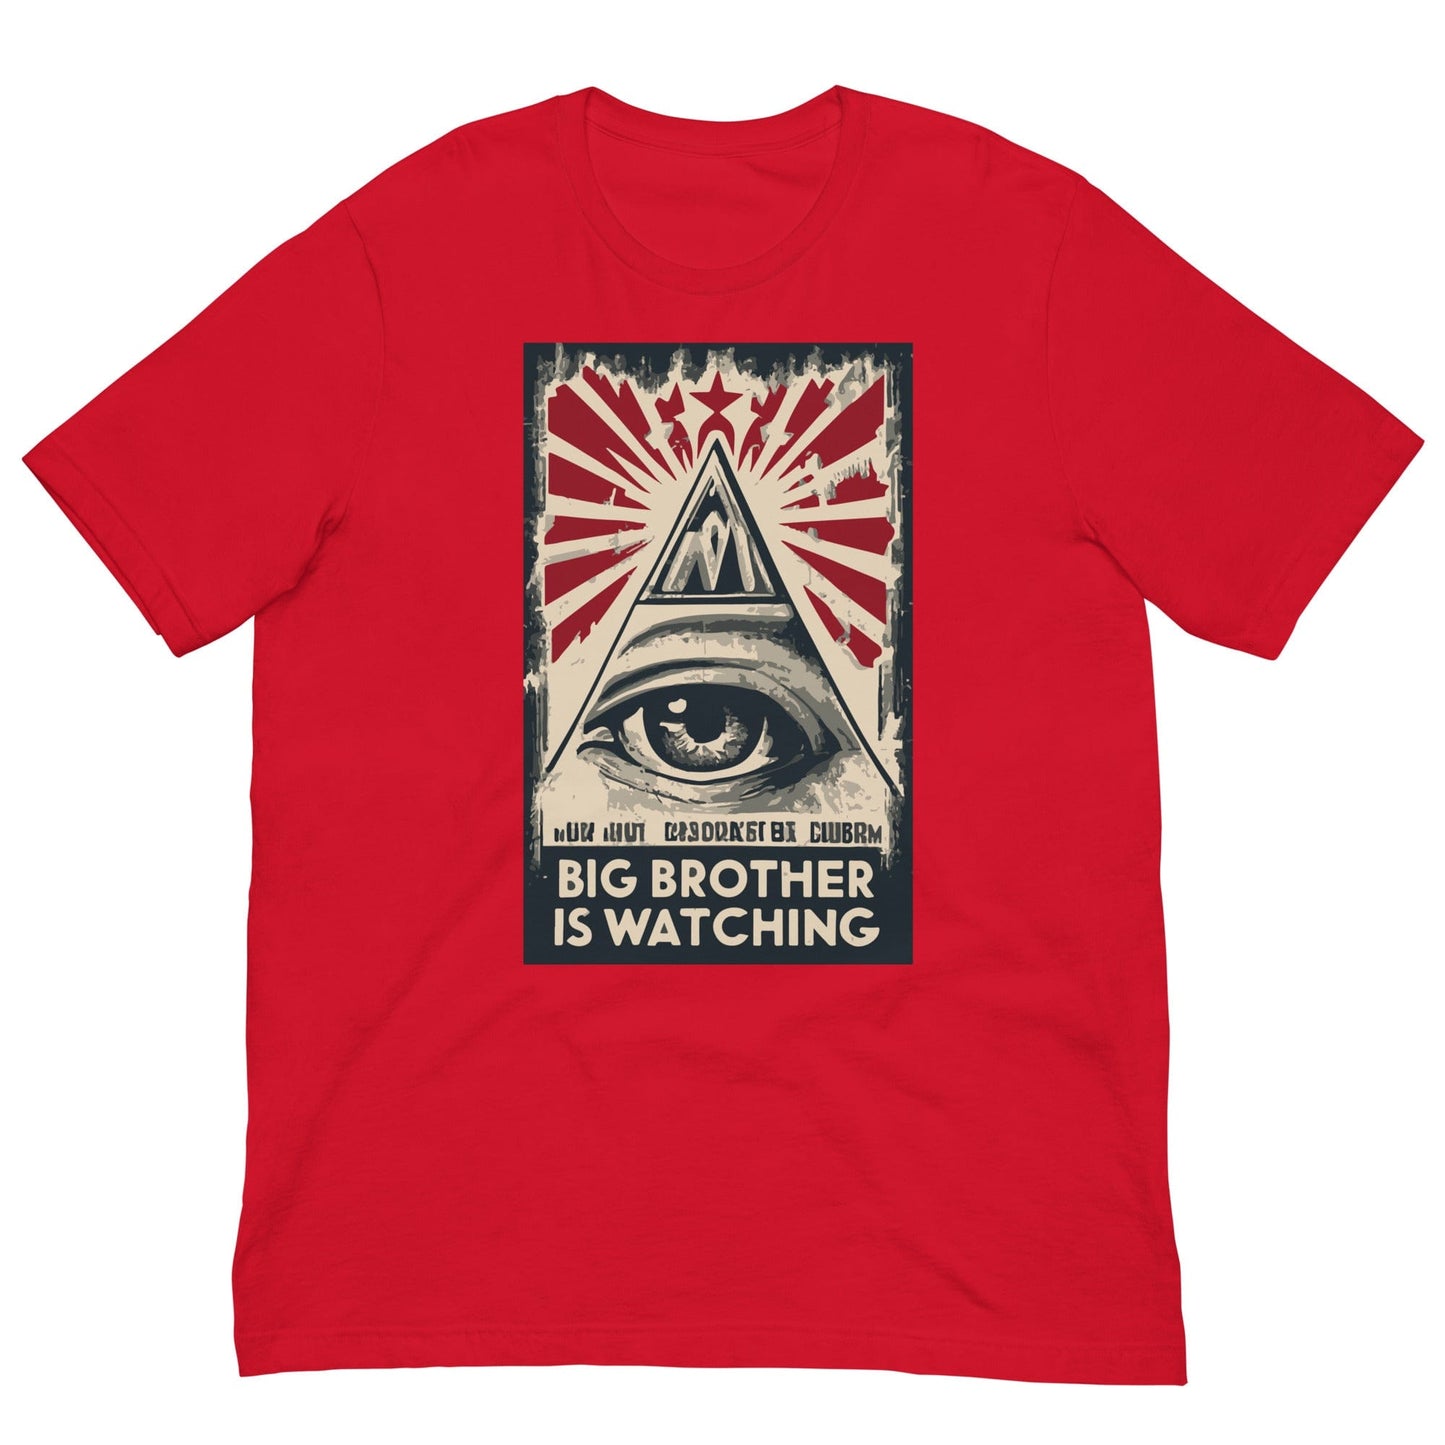 Big Brother is watching T-shirt Red / XS